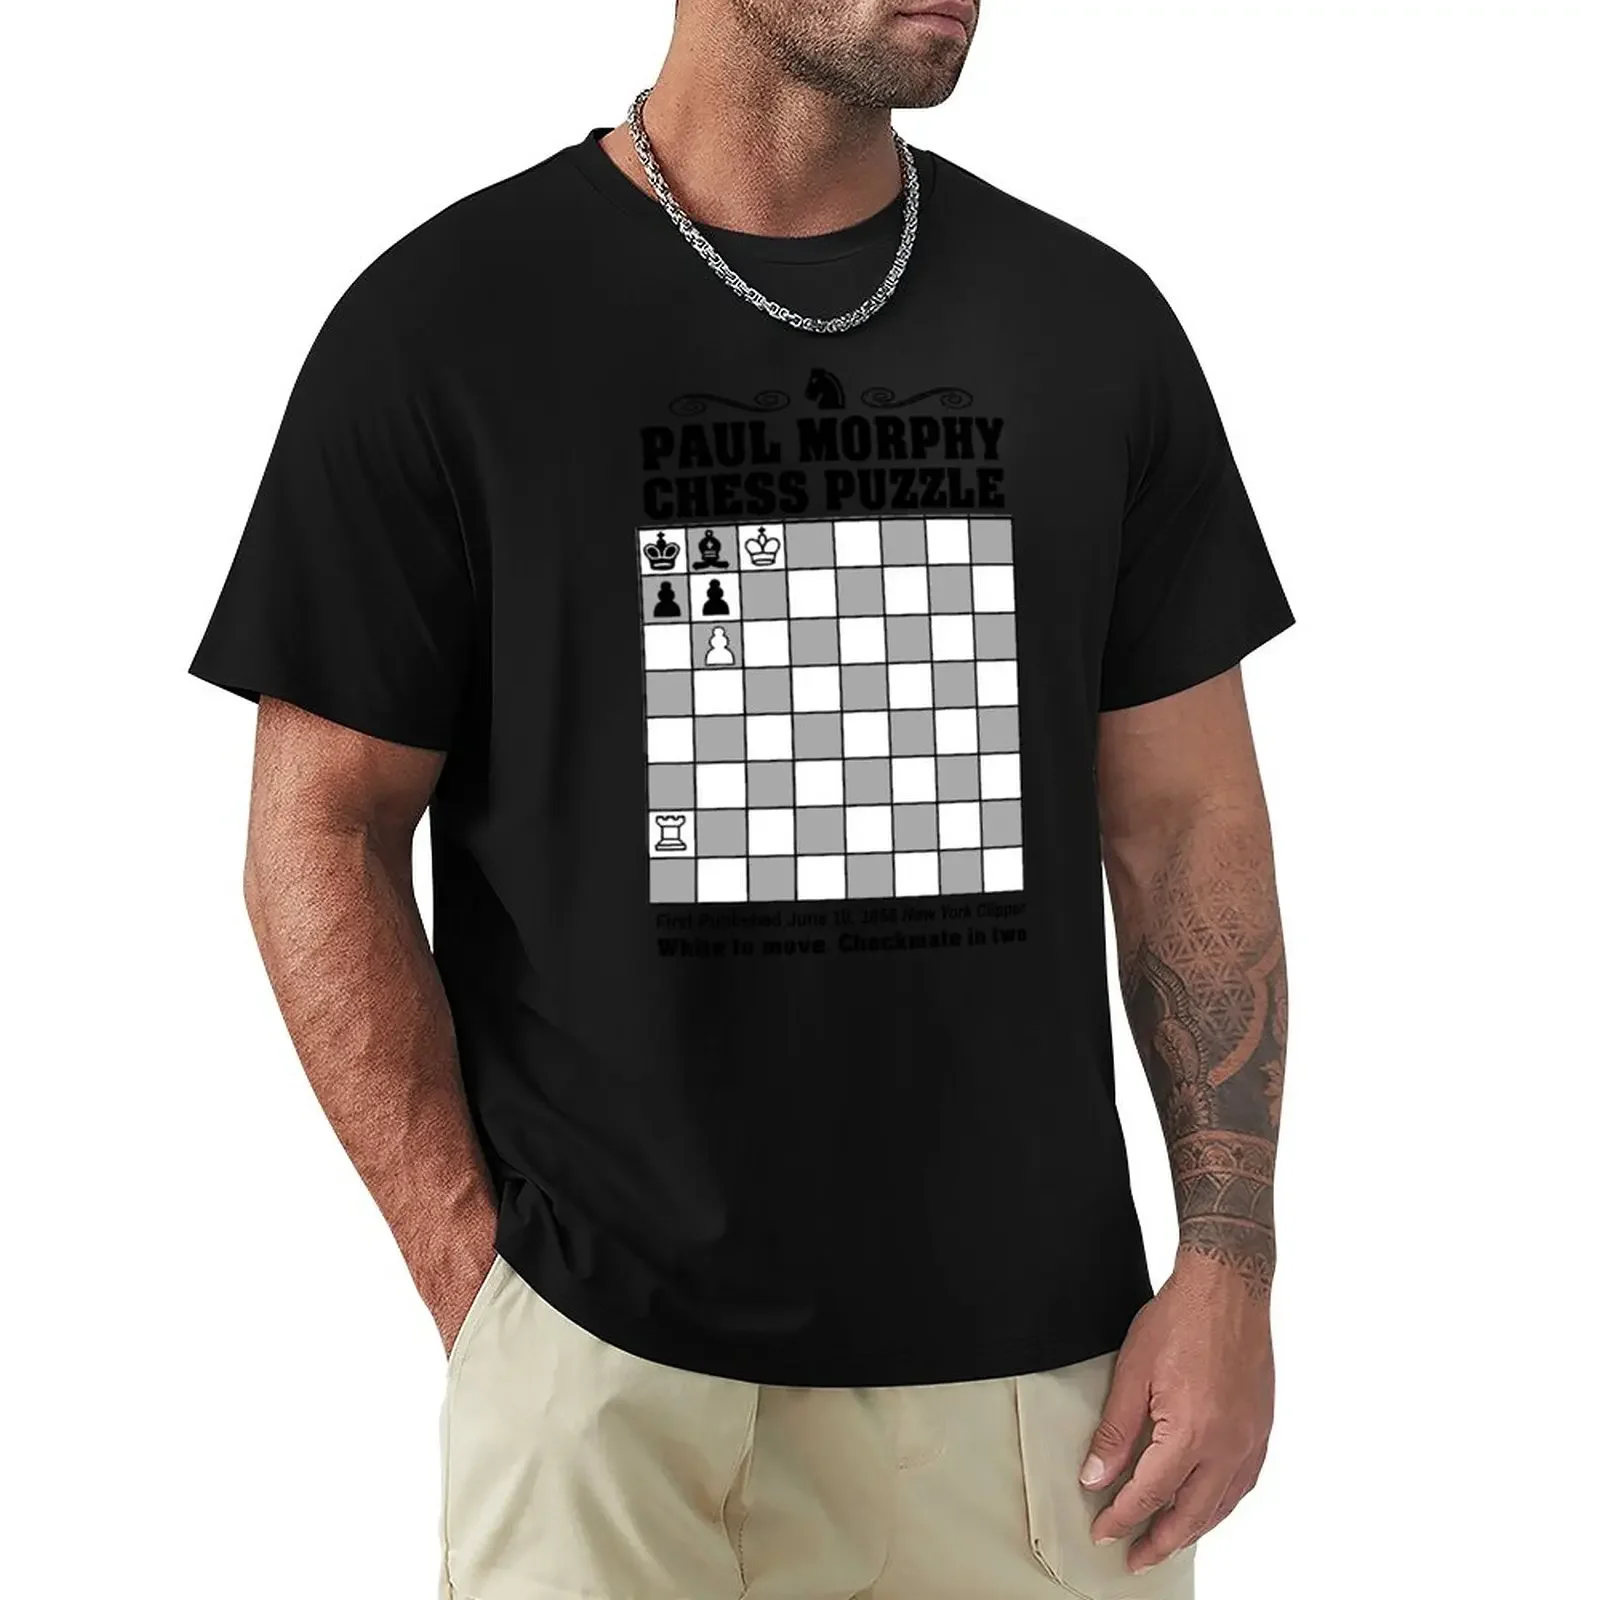 

Paul Morphy--Chess Puzzle T-Shirt quick drying customs design your own Aesthetic clothing Men's cotton t-shirt